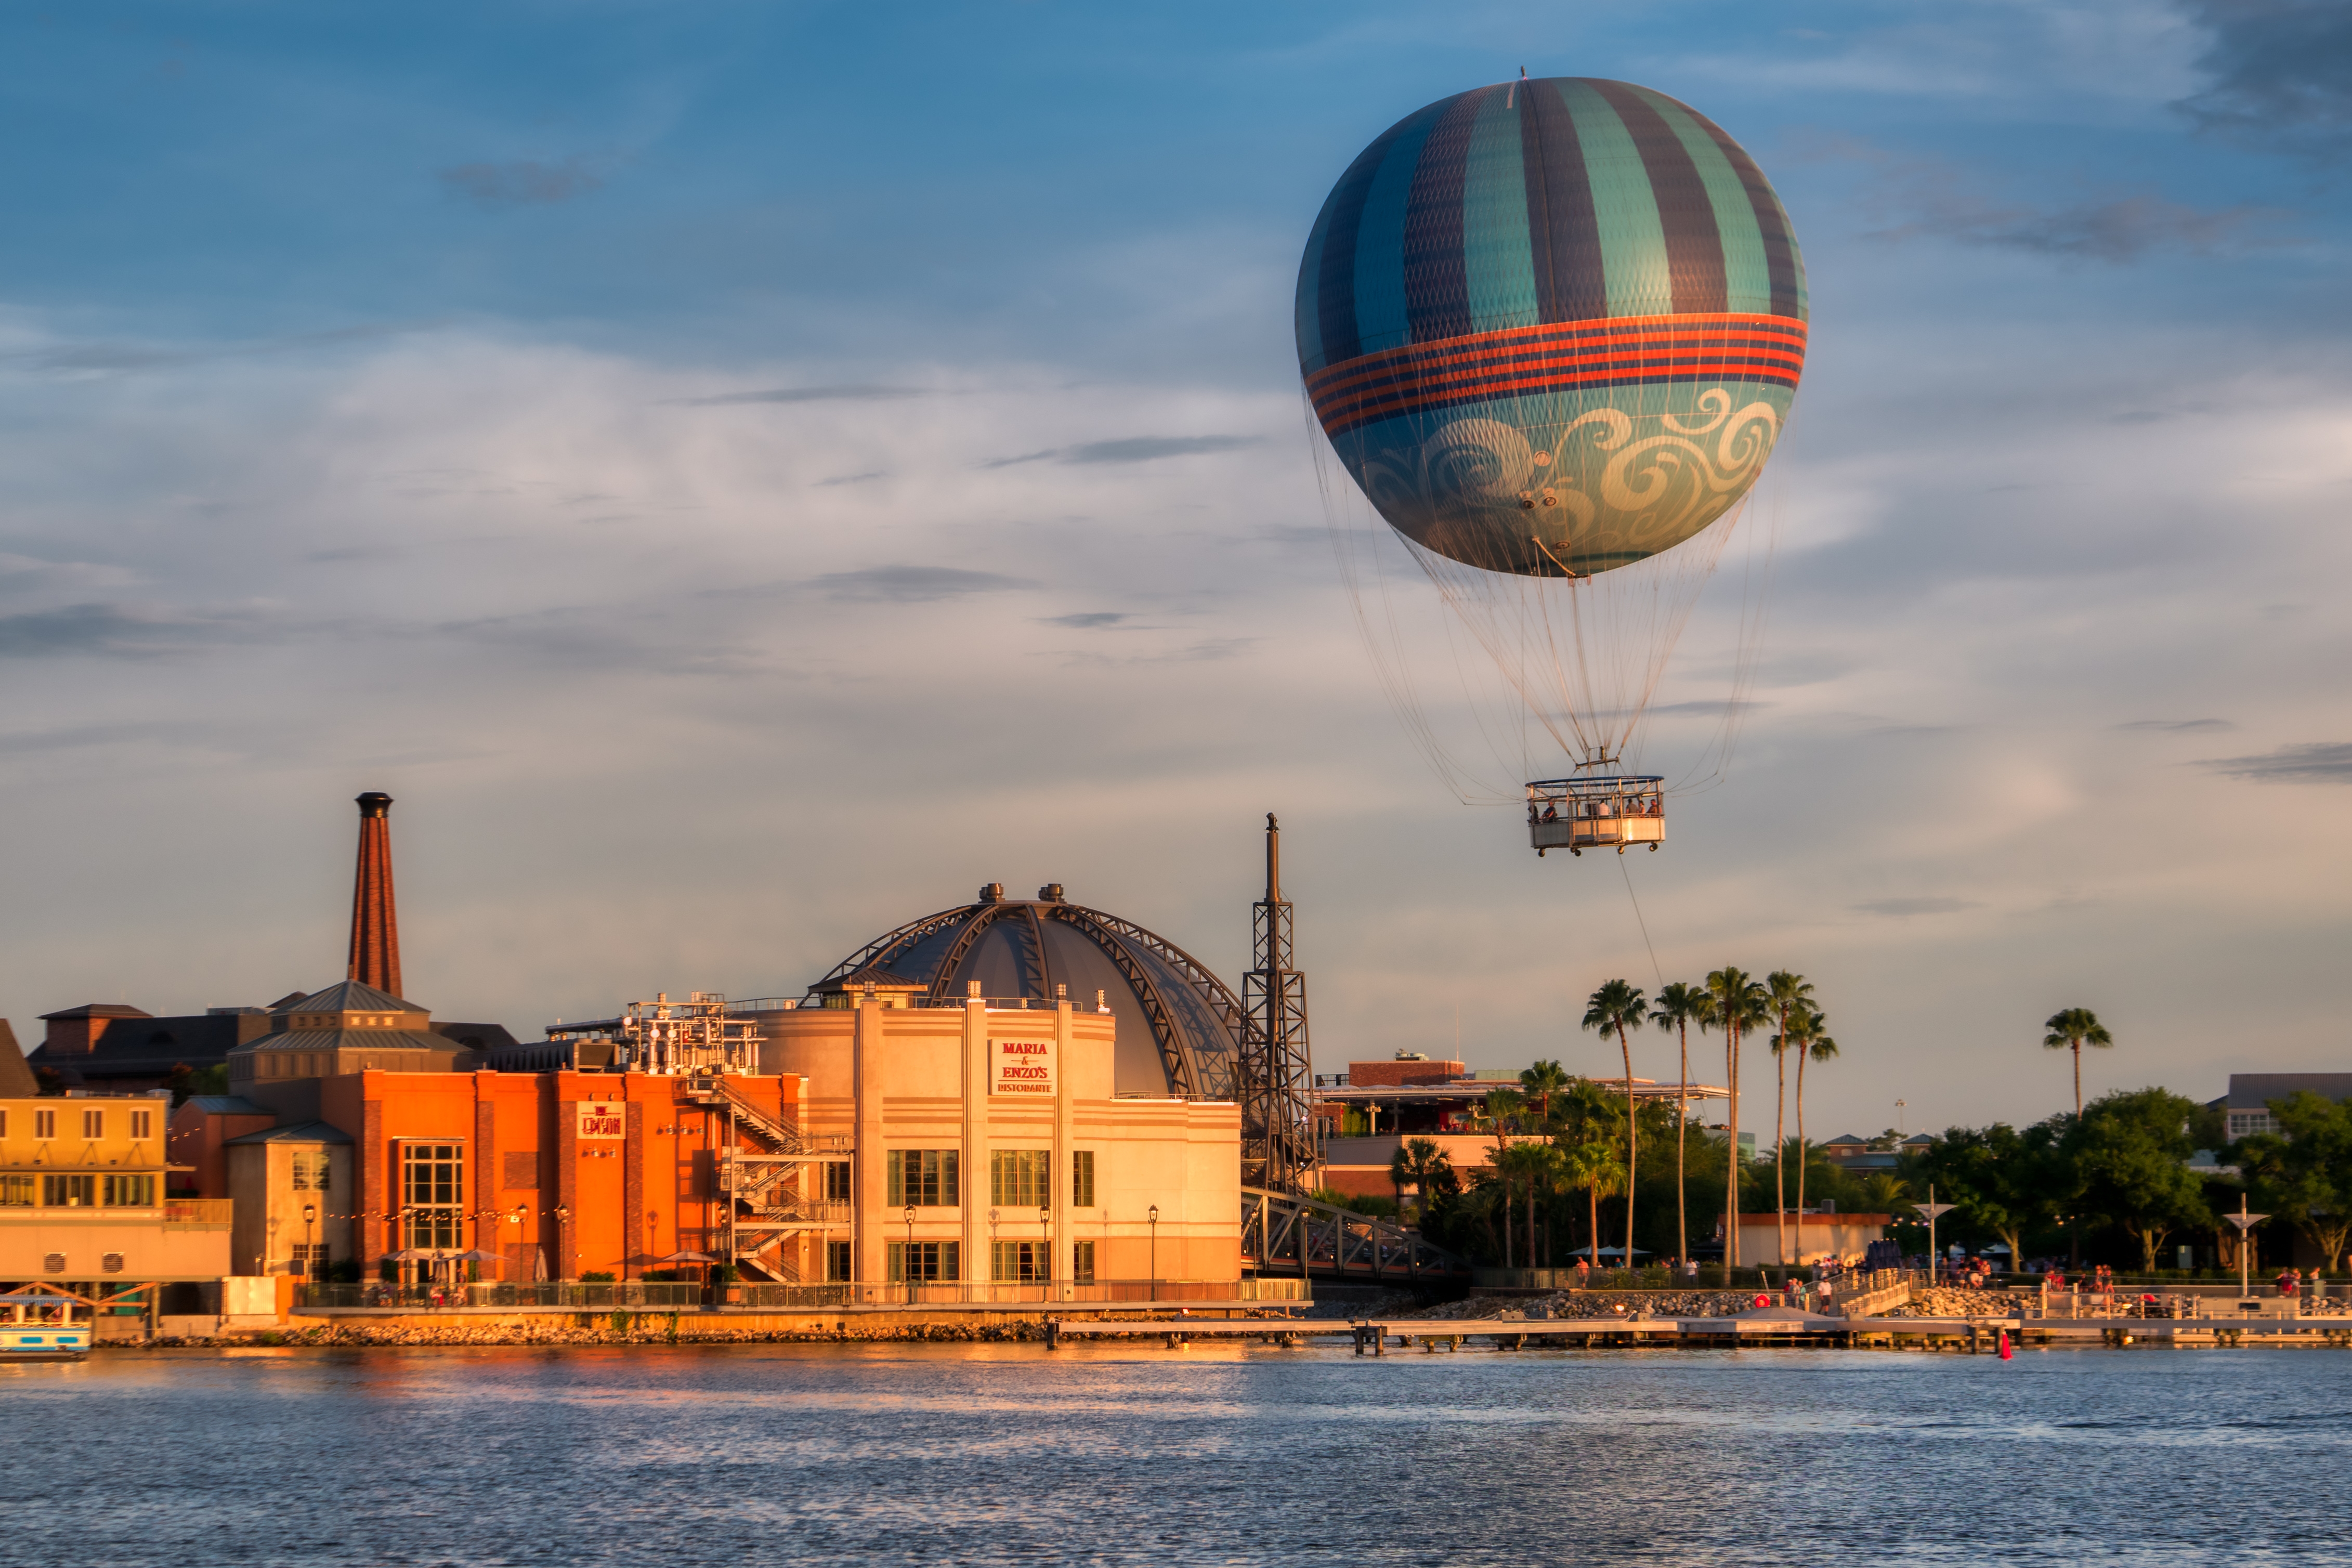 Best Things to Do in Orlando for an Epic Family Vacation - Disney Springs with Hot Air Balloon at Sunset